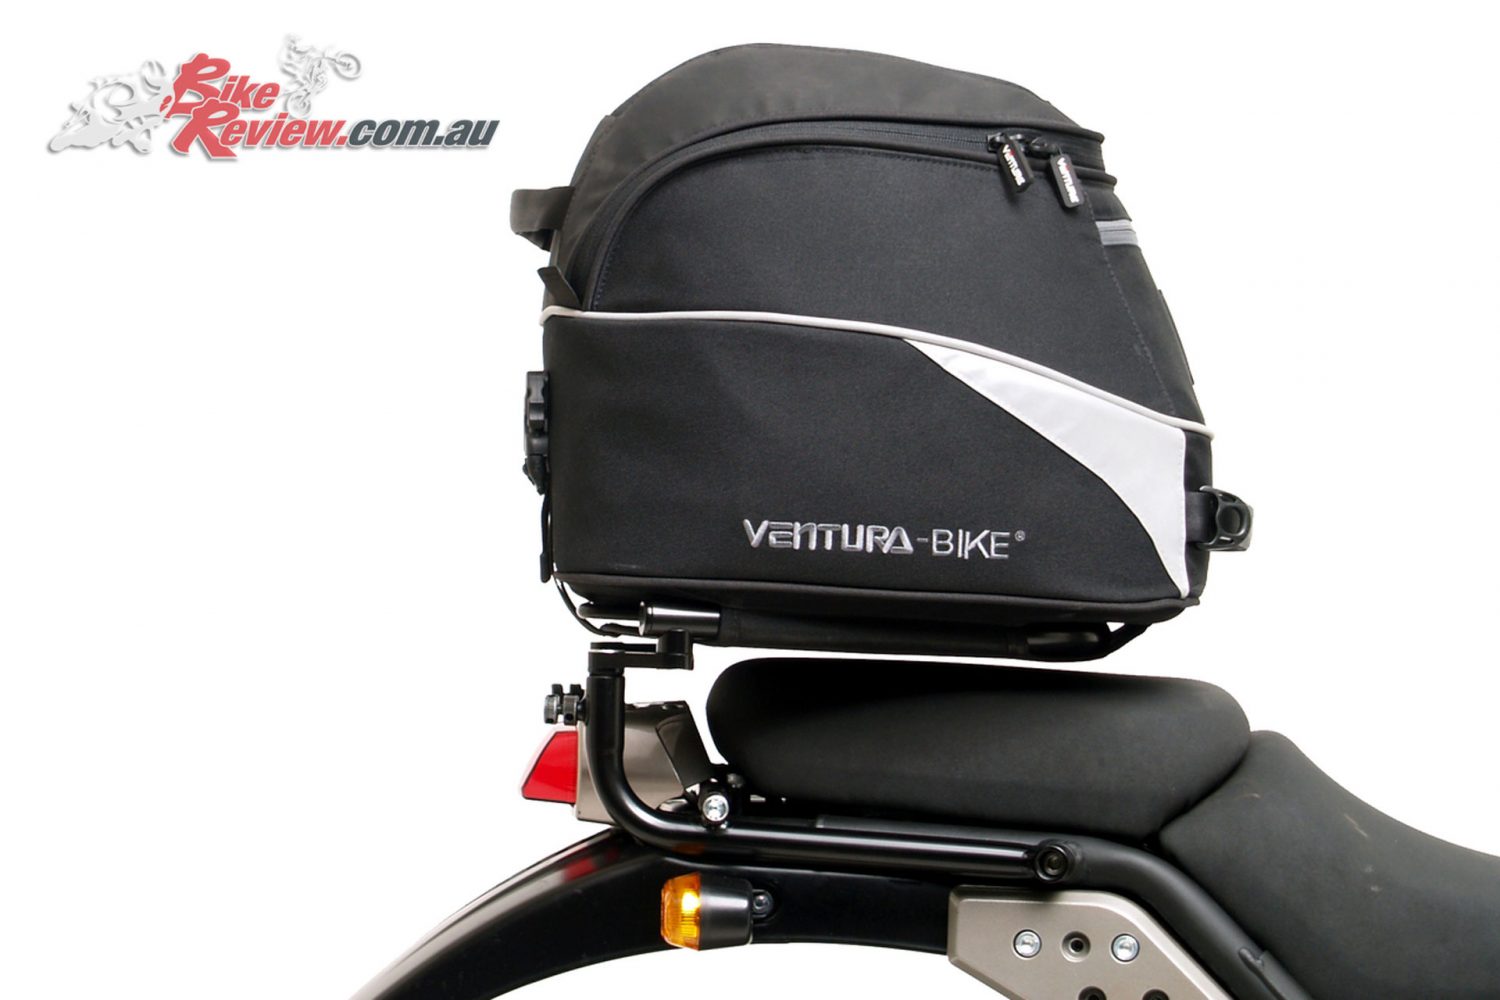 The Royal Enfield Himalayan fitted with the Ventura EVO-22 rack and bag